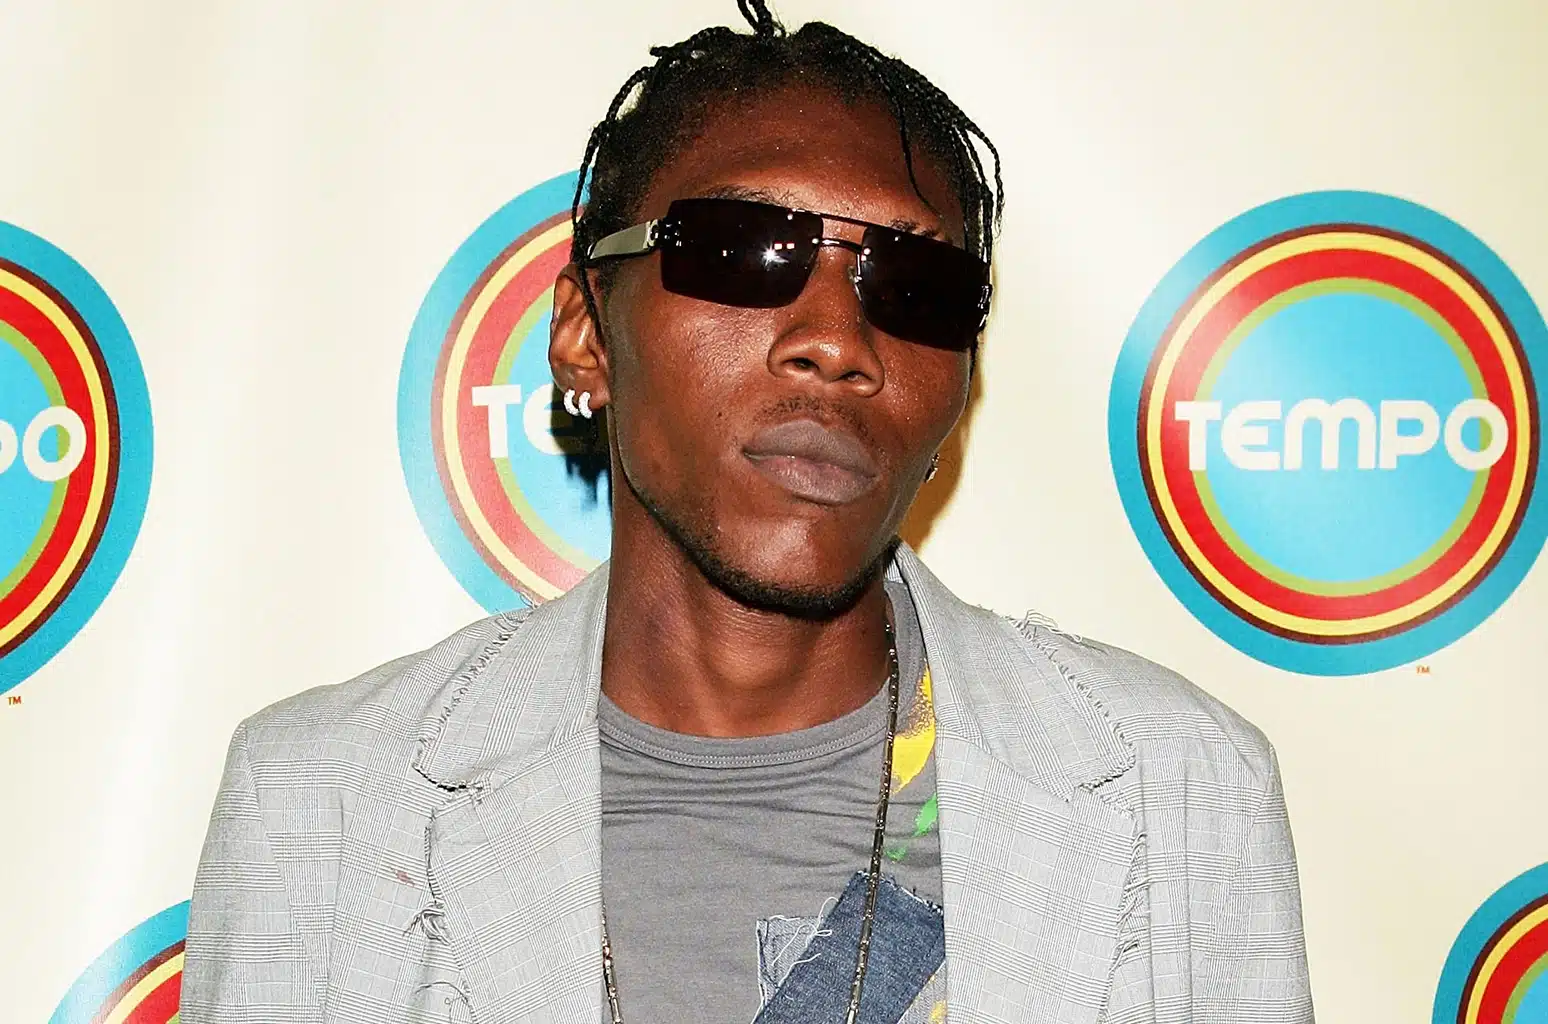 Vybz Kartel poses on a red carpet in sunglasses